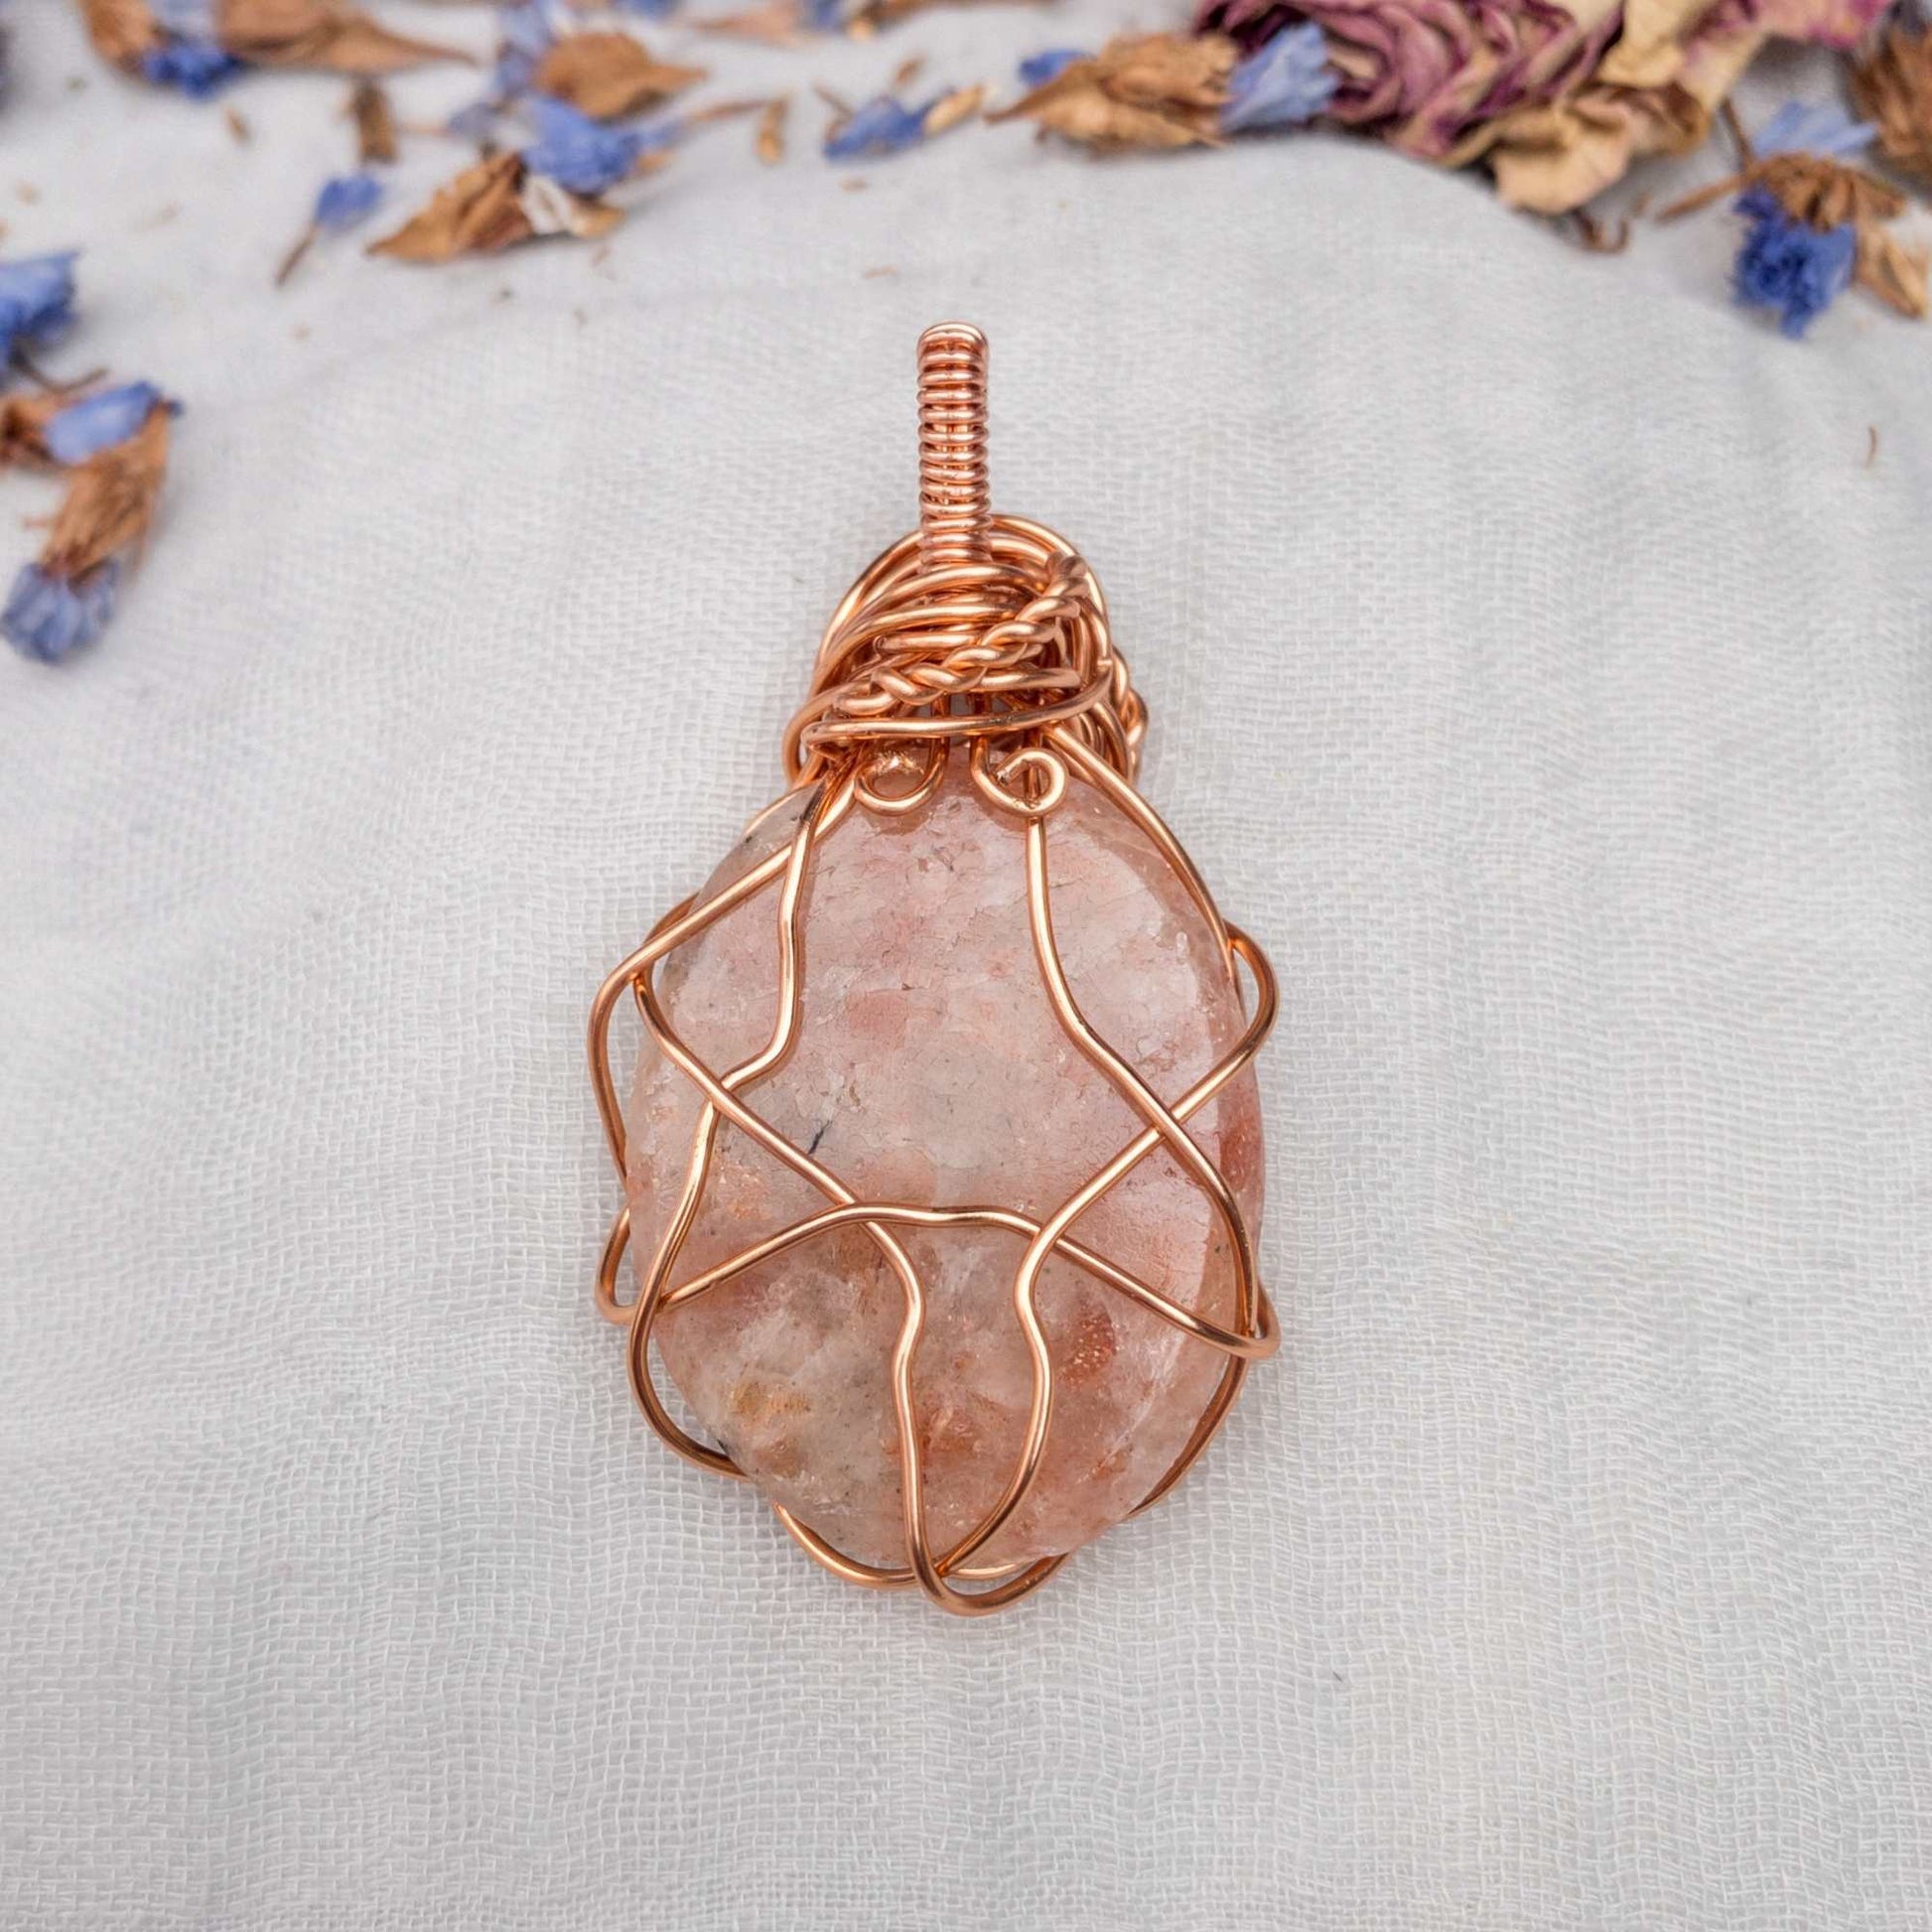 back of large sunstone wire wrapped in copper wire with rose wrap decal